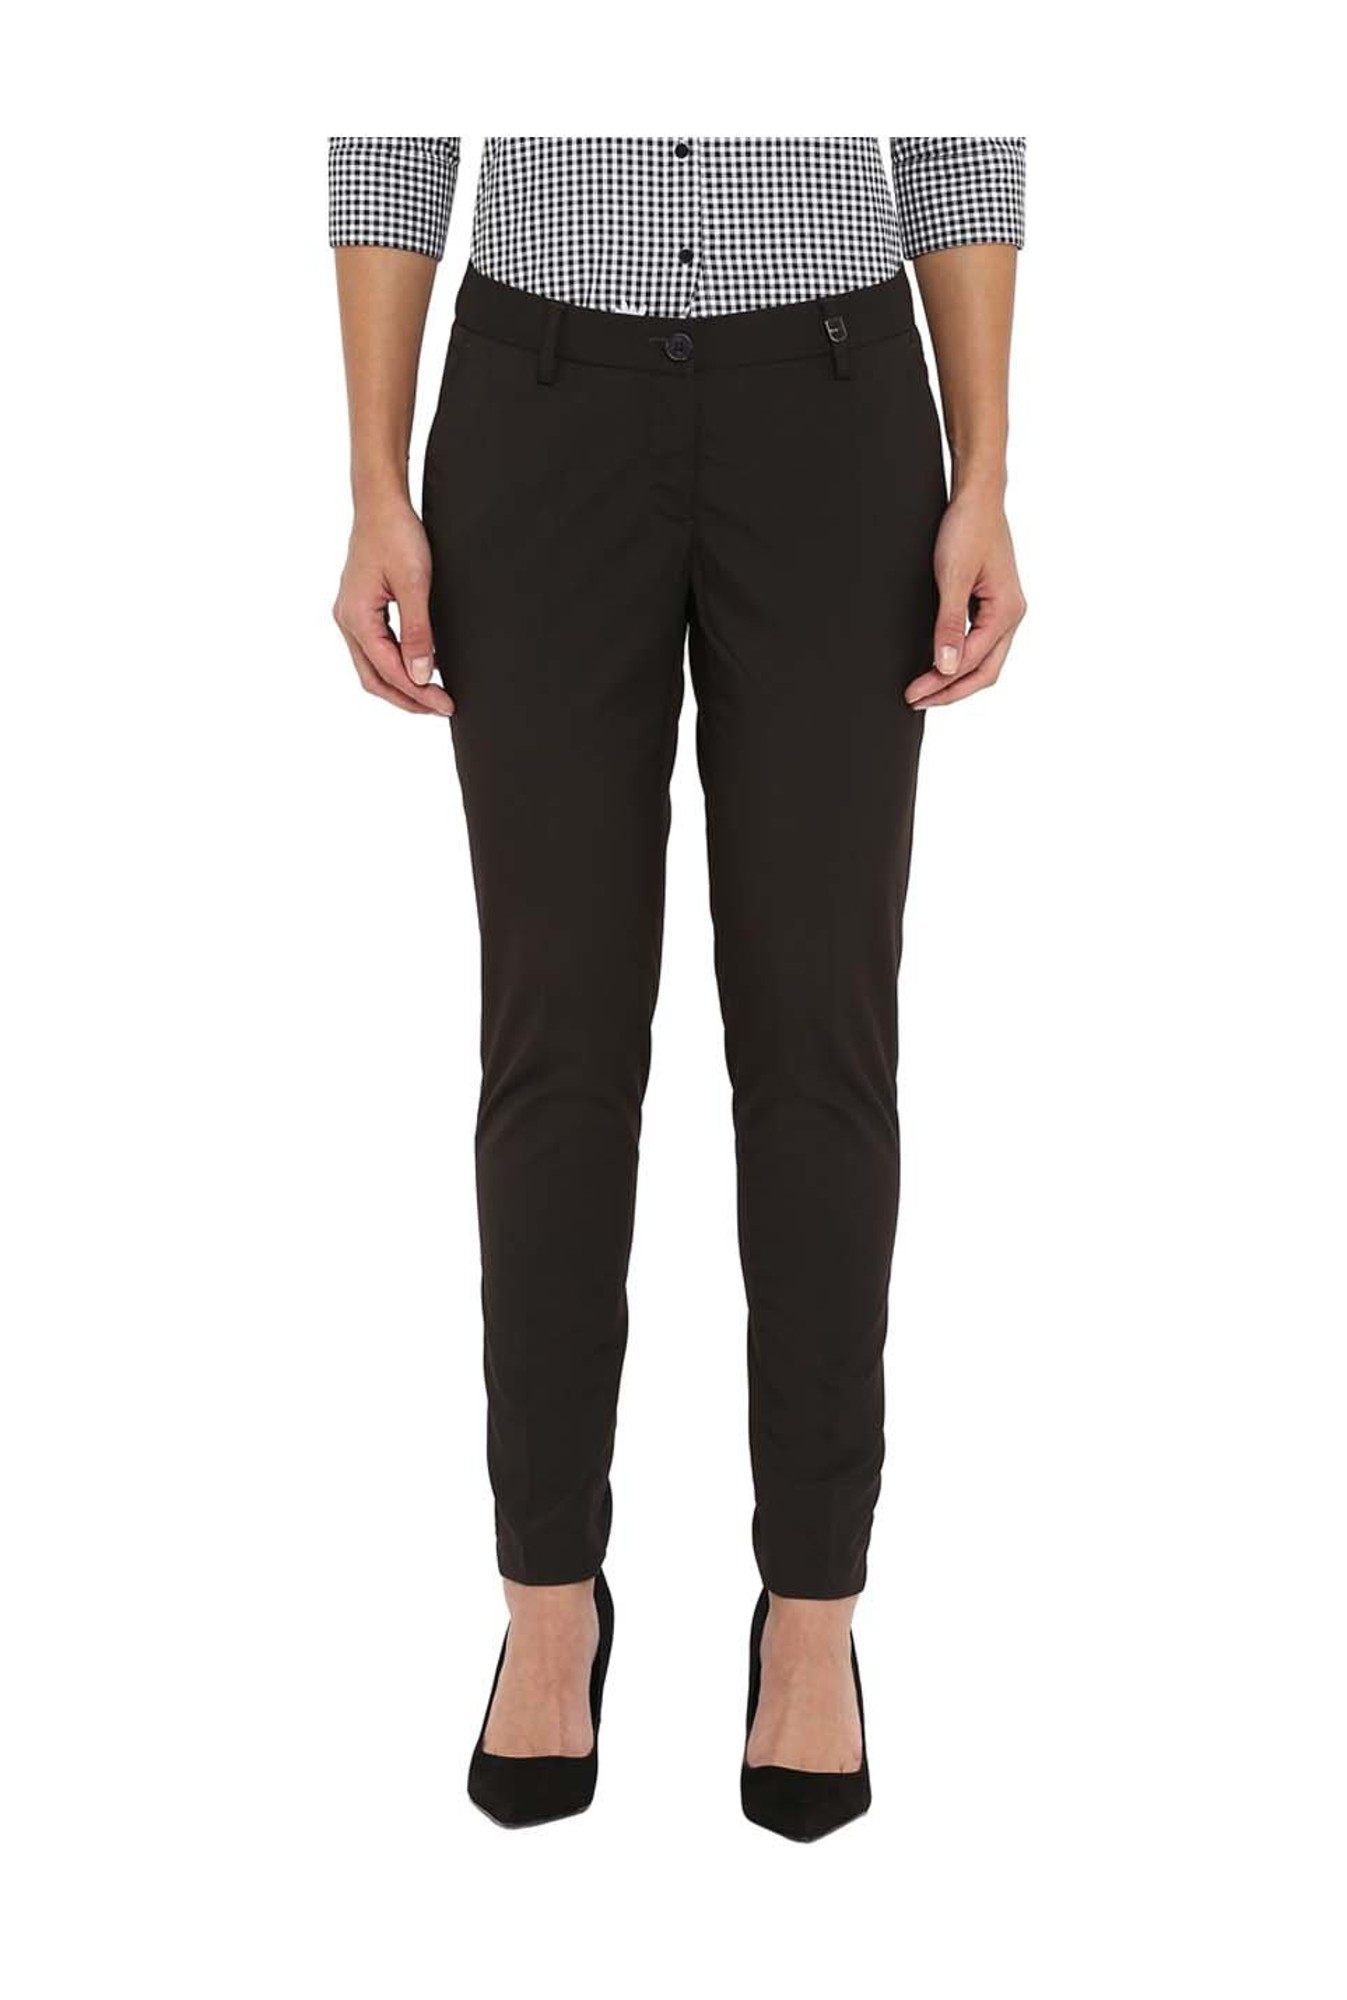 The 16 best women's dress pants for work and play